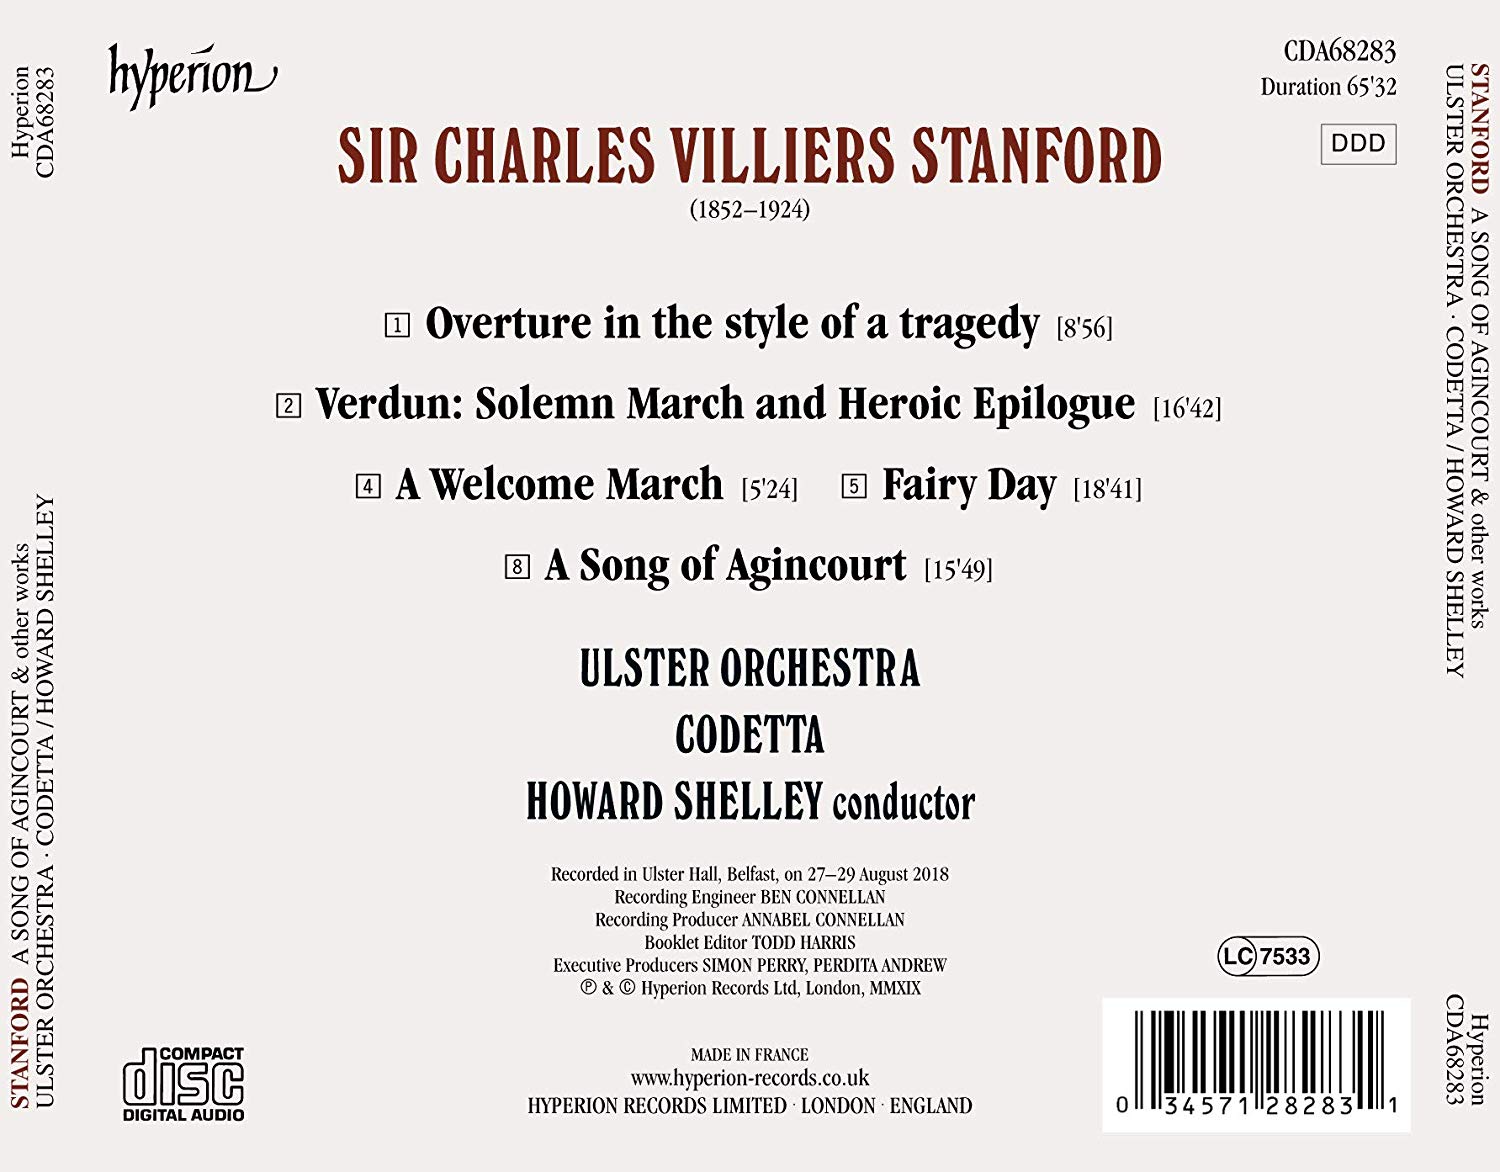 Howard Shelley 스탠포드: 아쟁쿠르의 노래 (Charles Villiers Stanford: A Song of Agincourt)